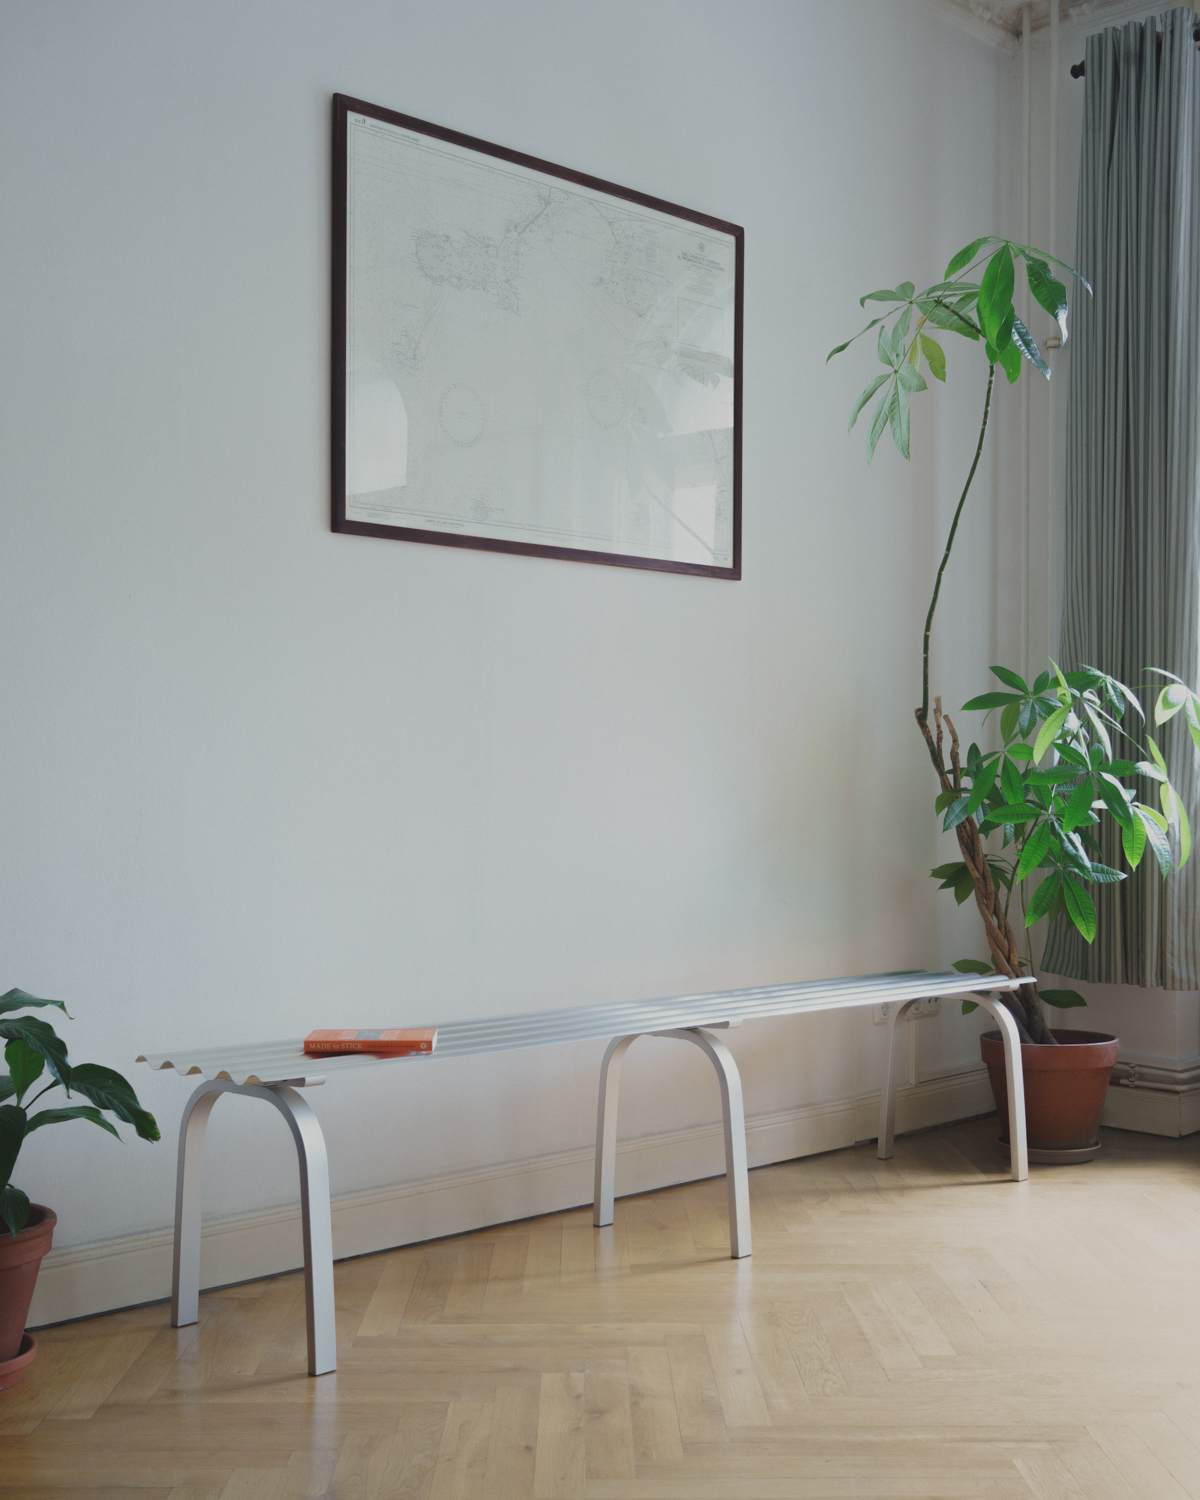 Minimalist Furniture Collection "No.7" Project by Tao & Jin